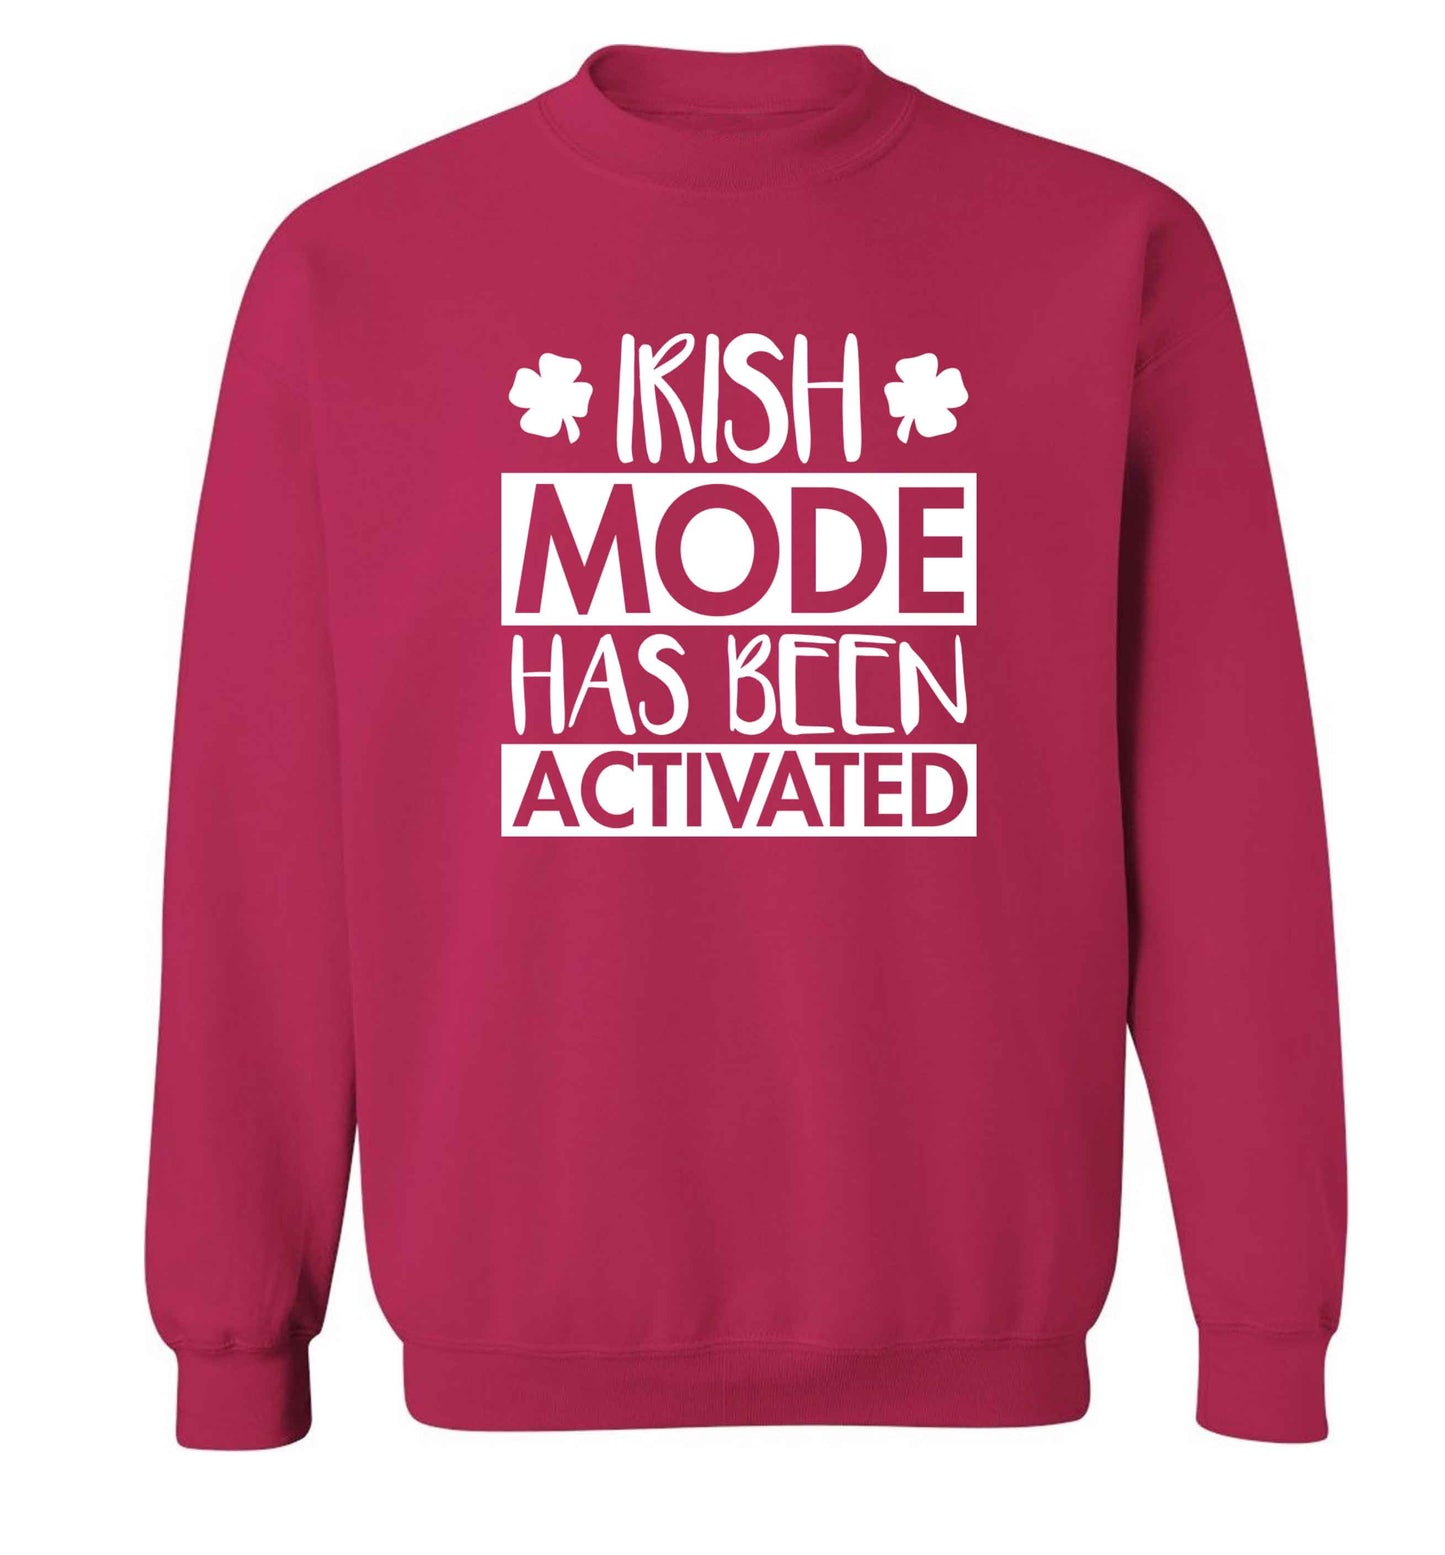 Irish mode has been activated adult's unisex pink sweater 2XL